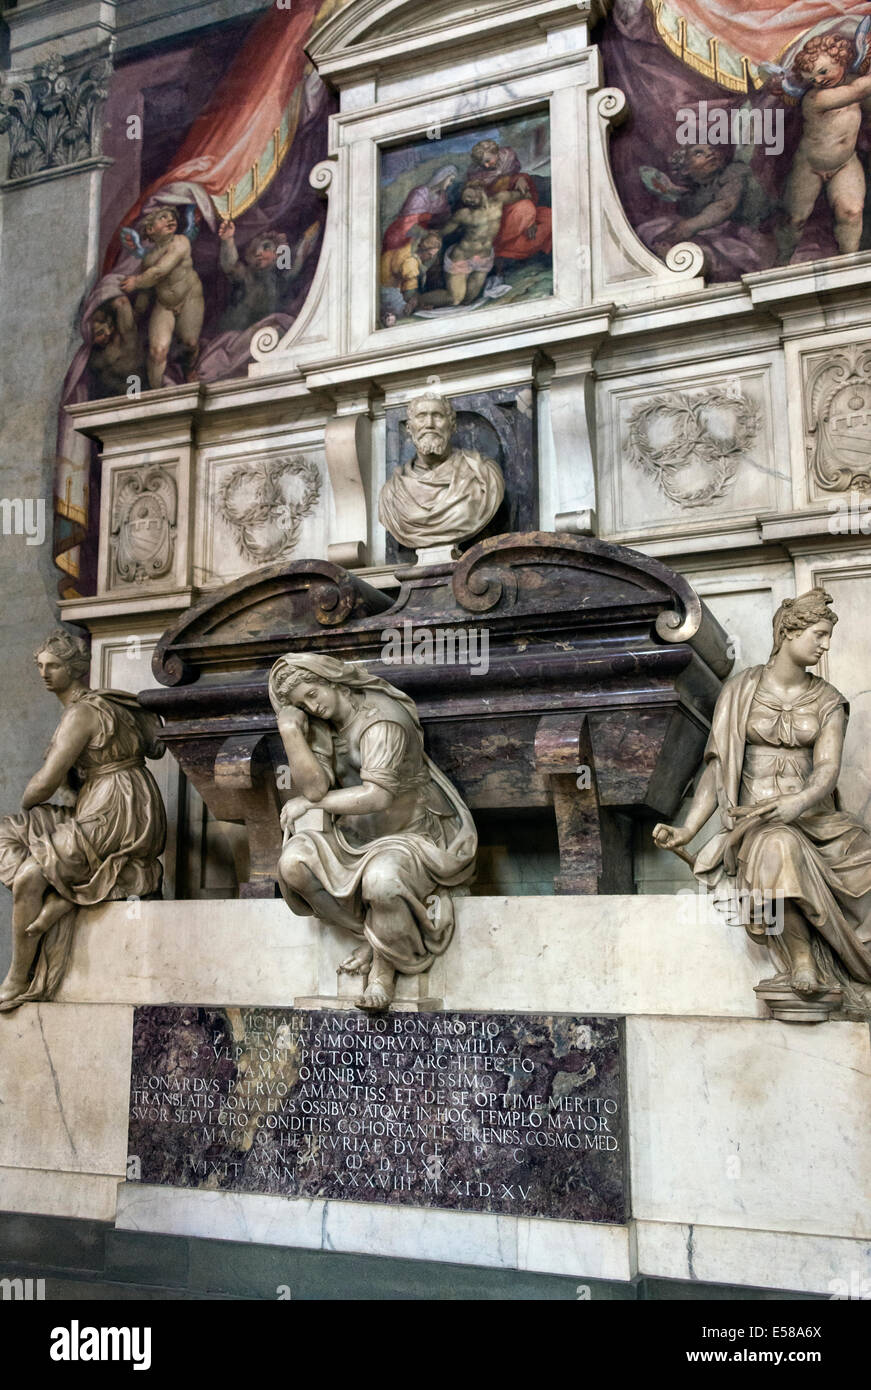 Michelangelo’s Crypt located in the church of Santa Croce Basilica, Florence, Italy Stock Photo